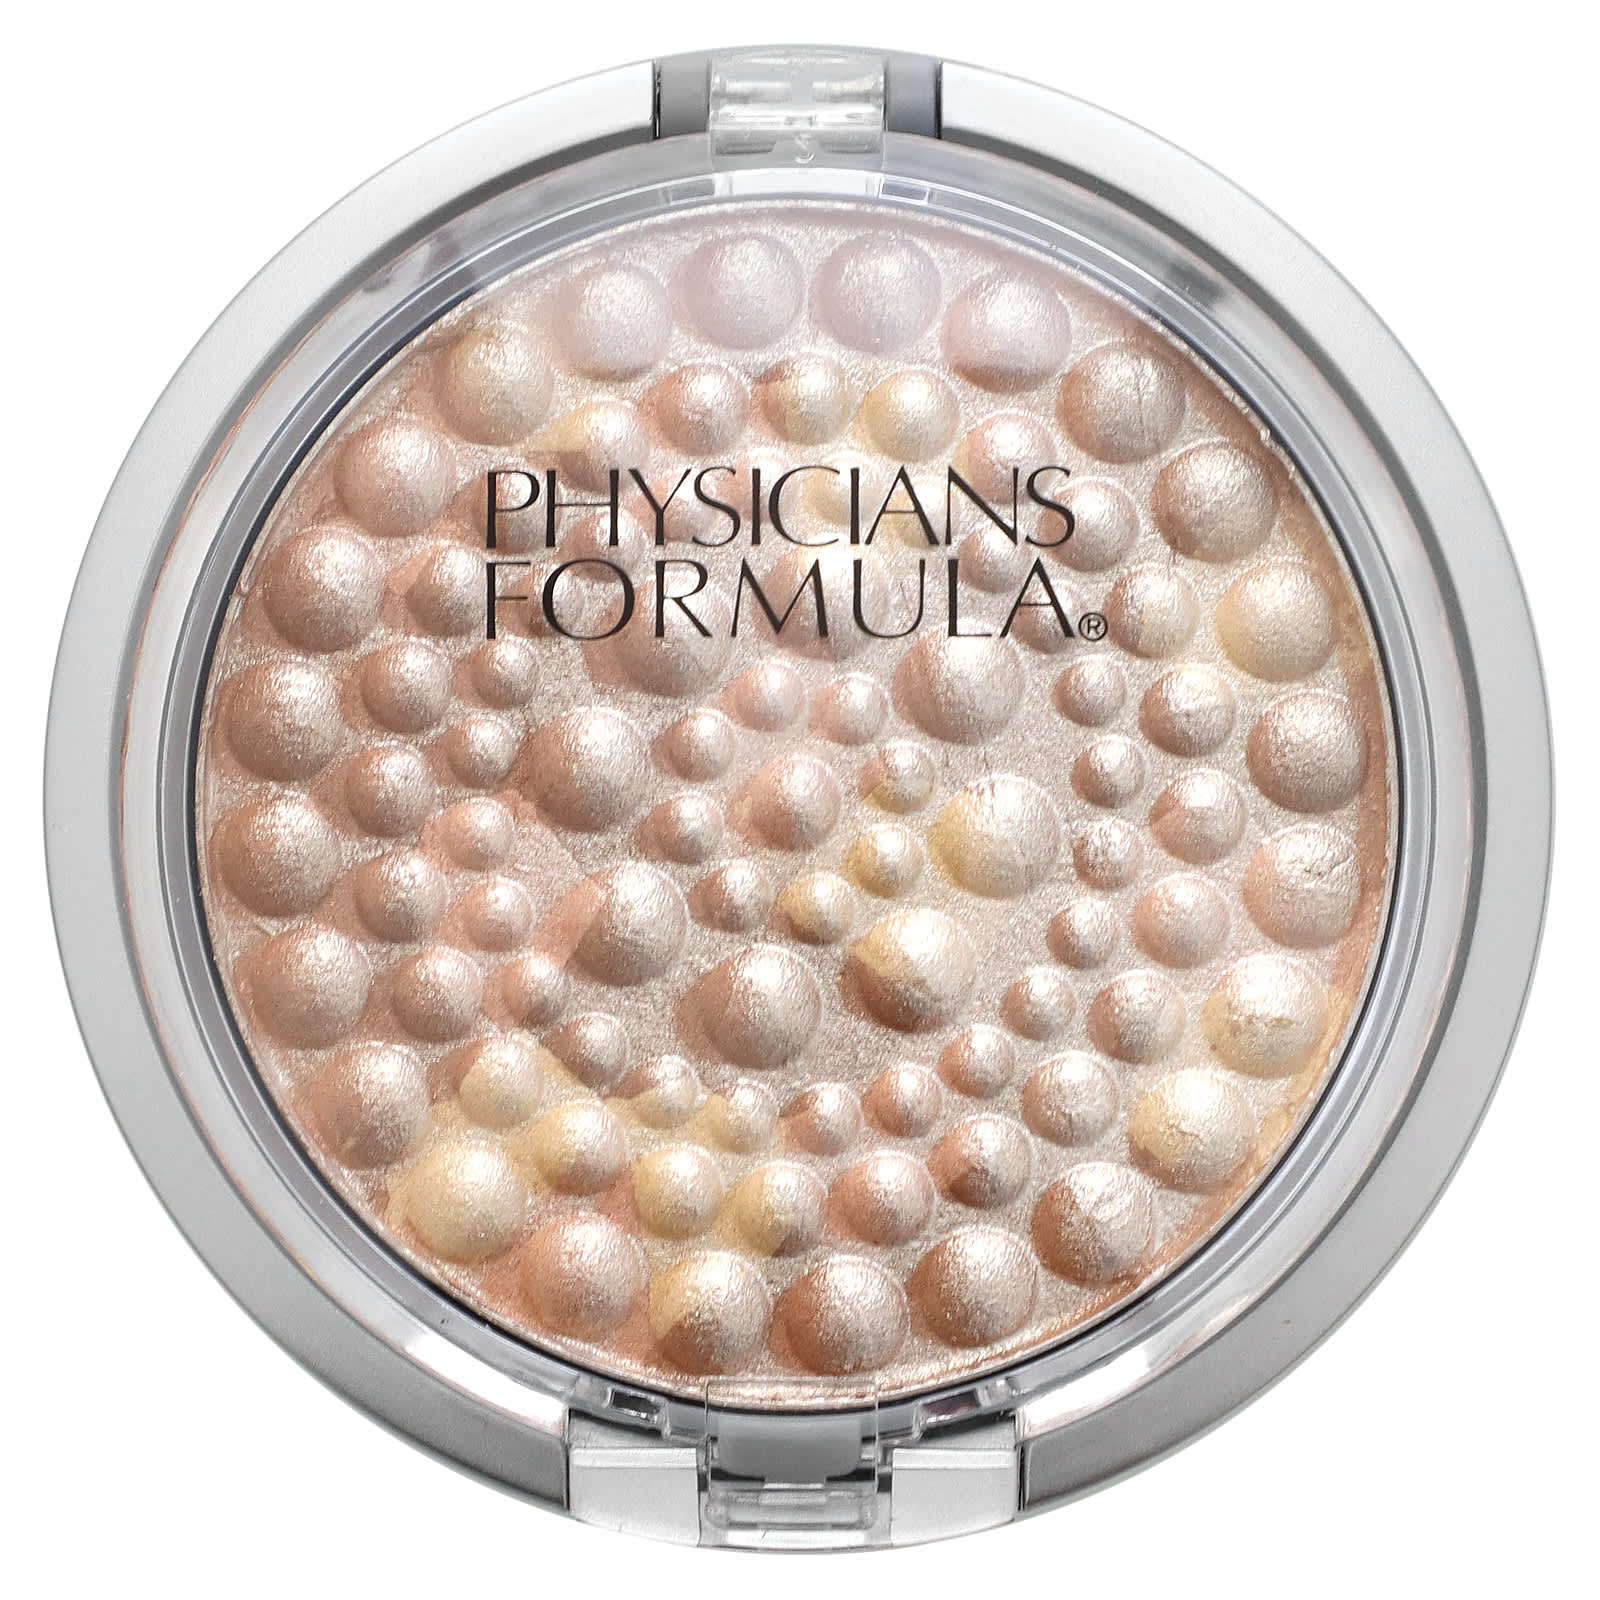 Physicians Formula Powder Palette Mineral Glow Pearls Blush, Natural Pearl  - 0.15 Oz, 2 Pack 